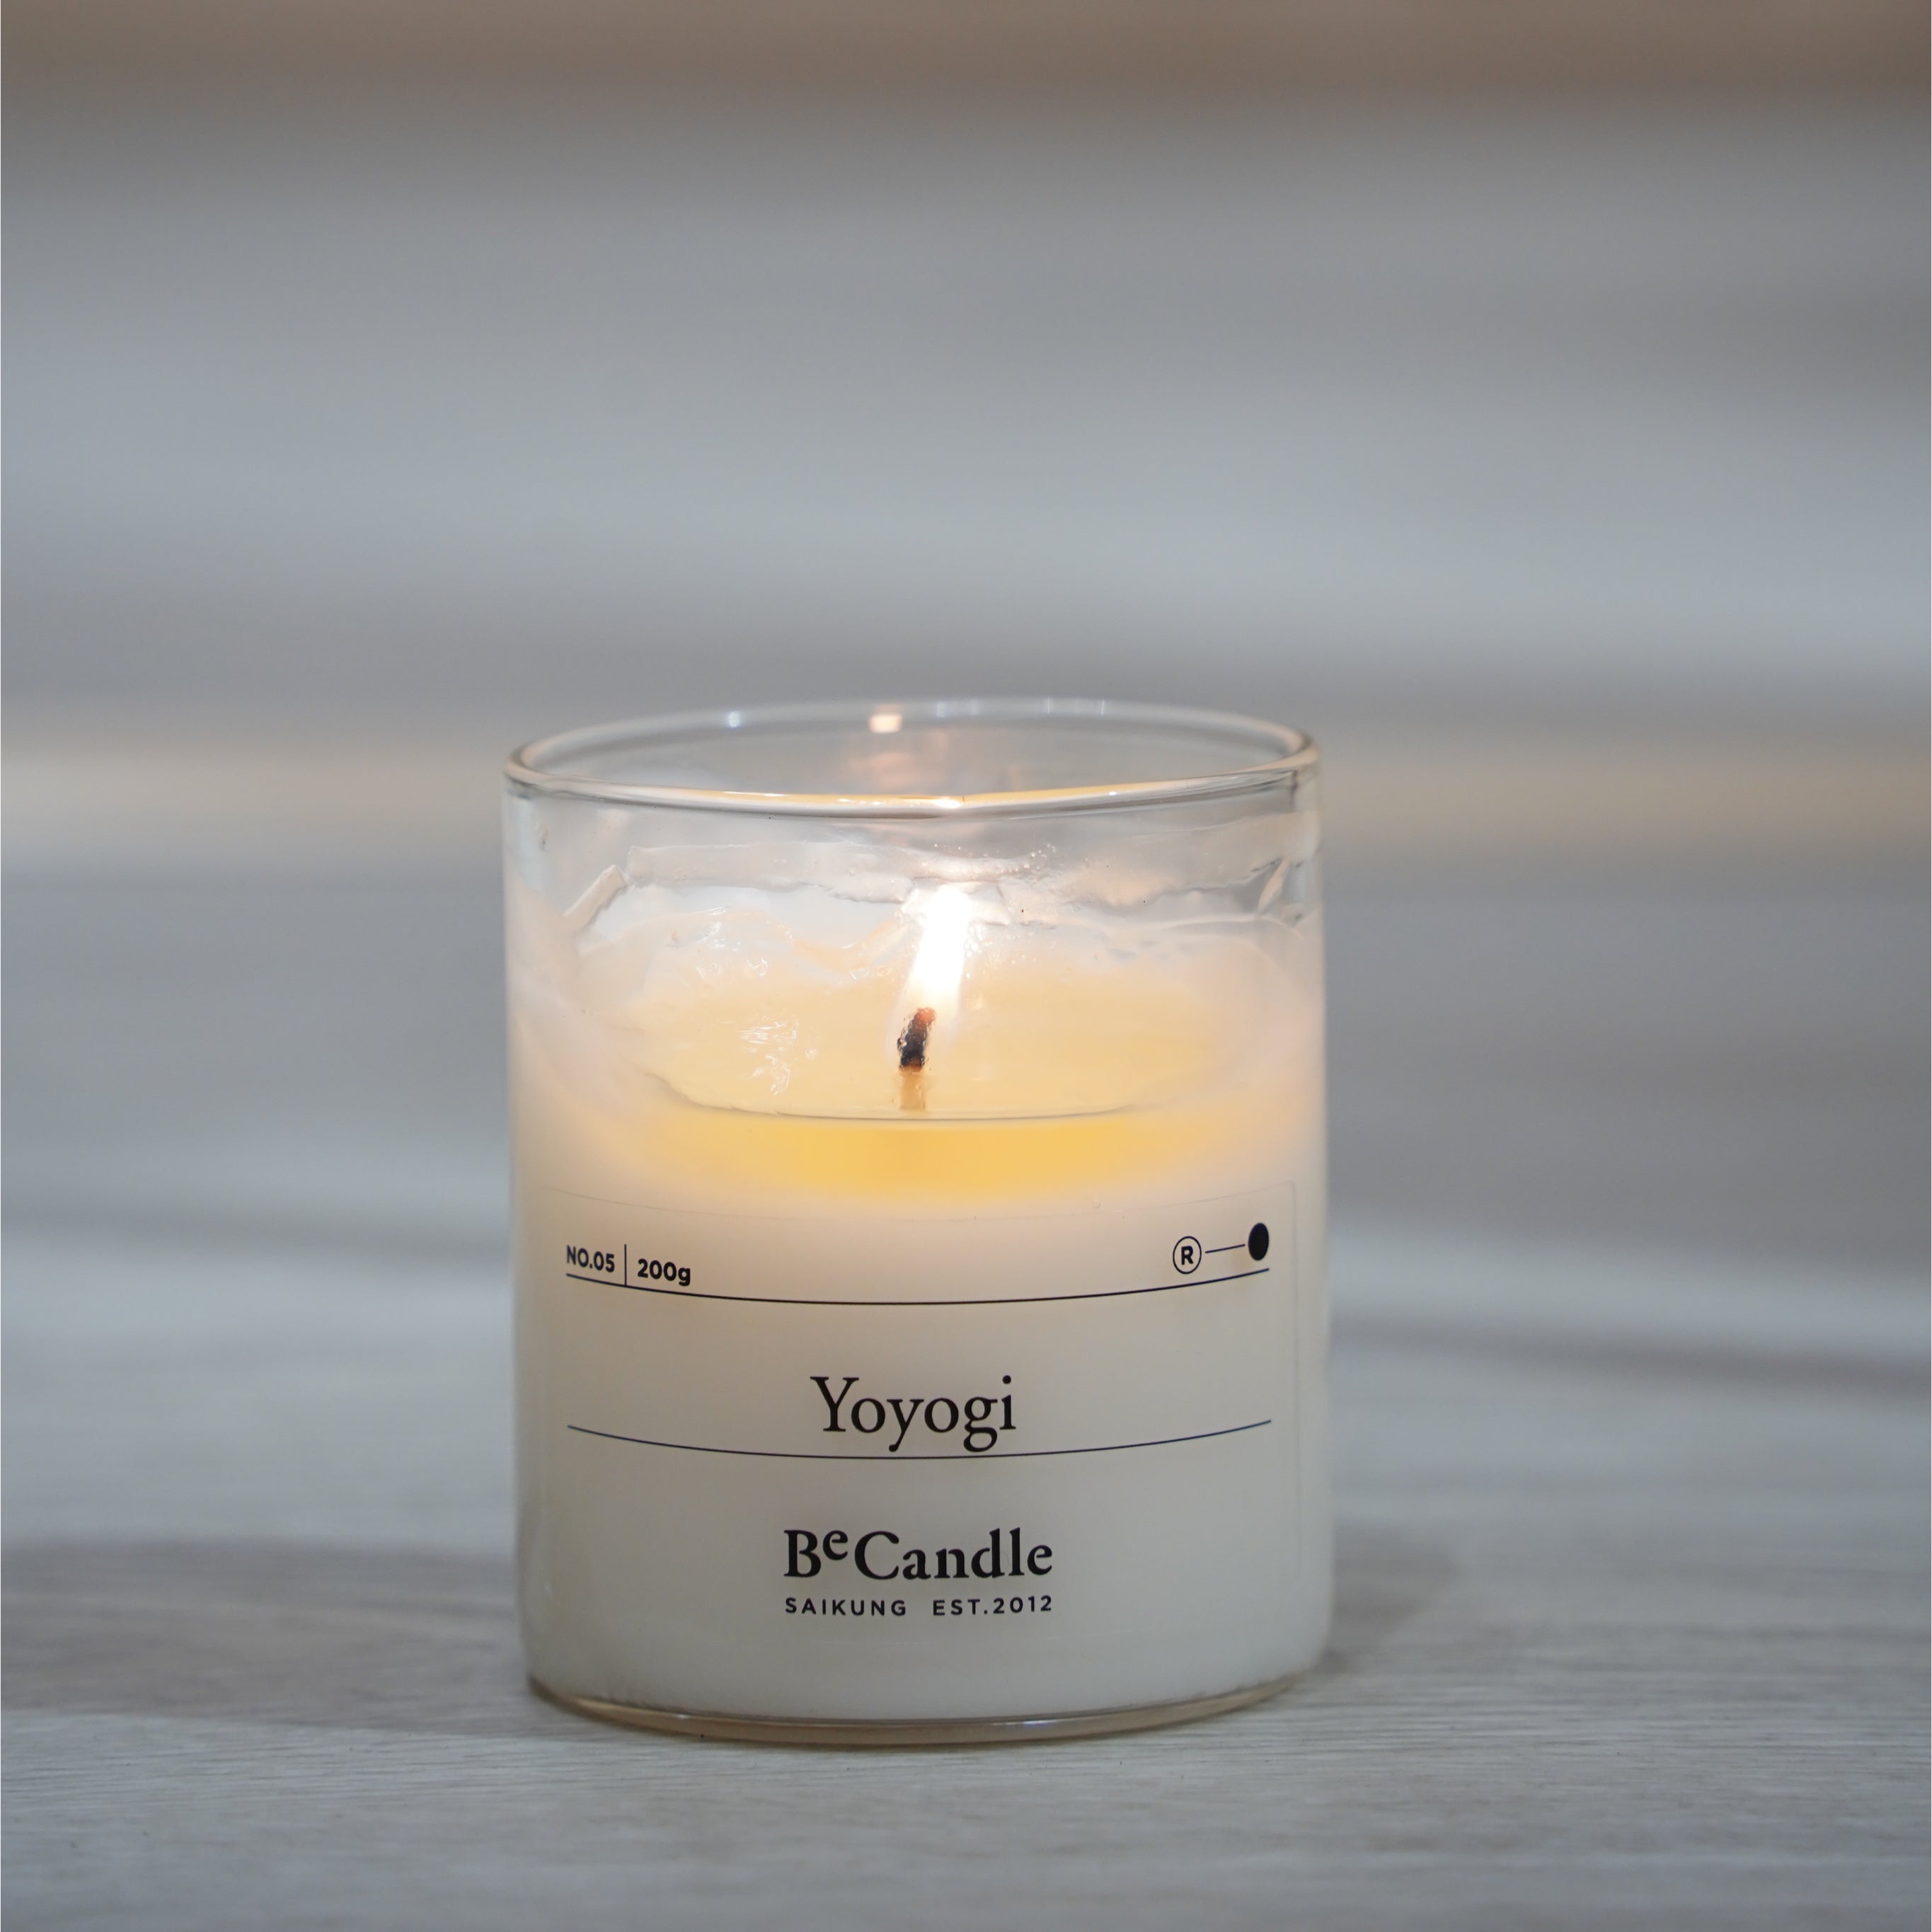 BeCandle 01. Peony Rose (200g / approx 50hrs)